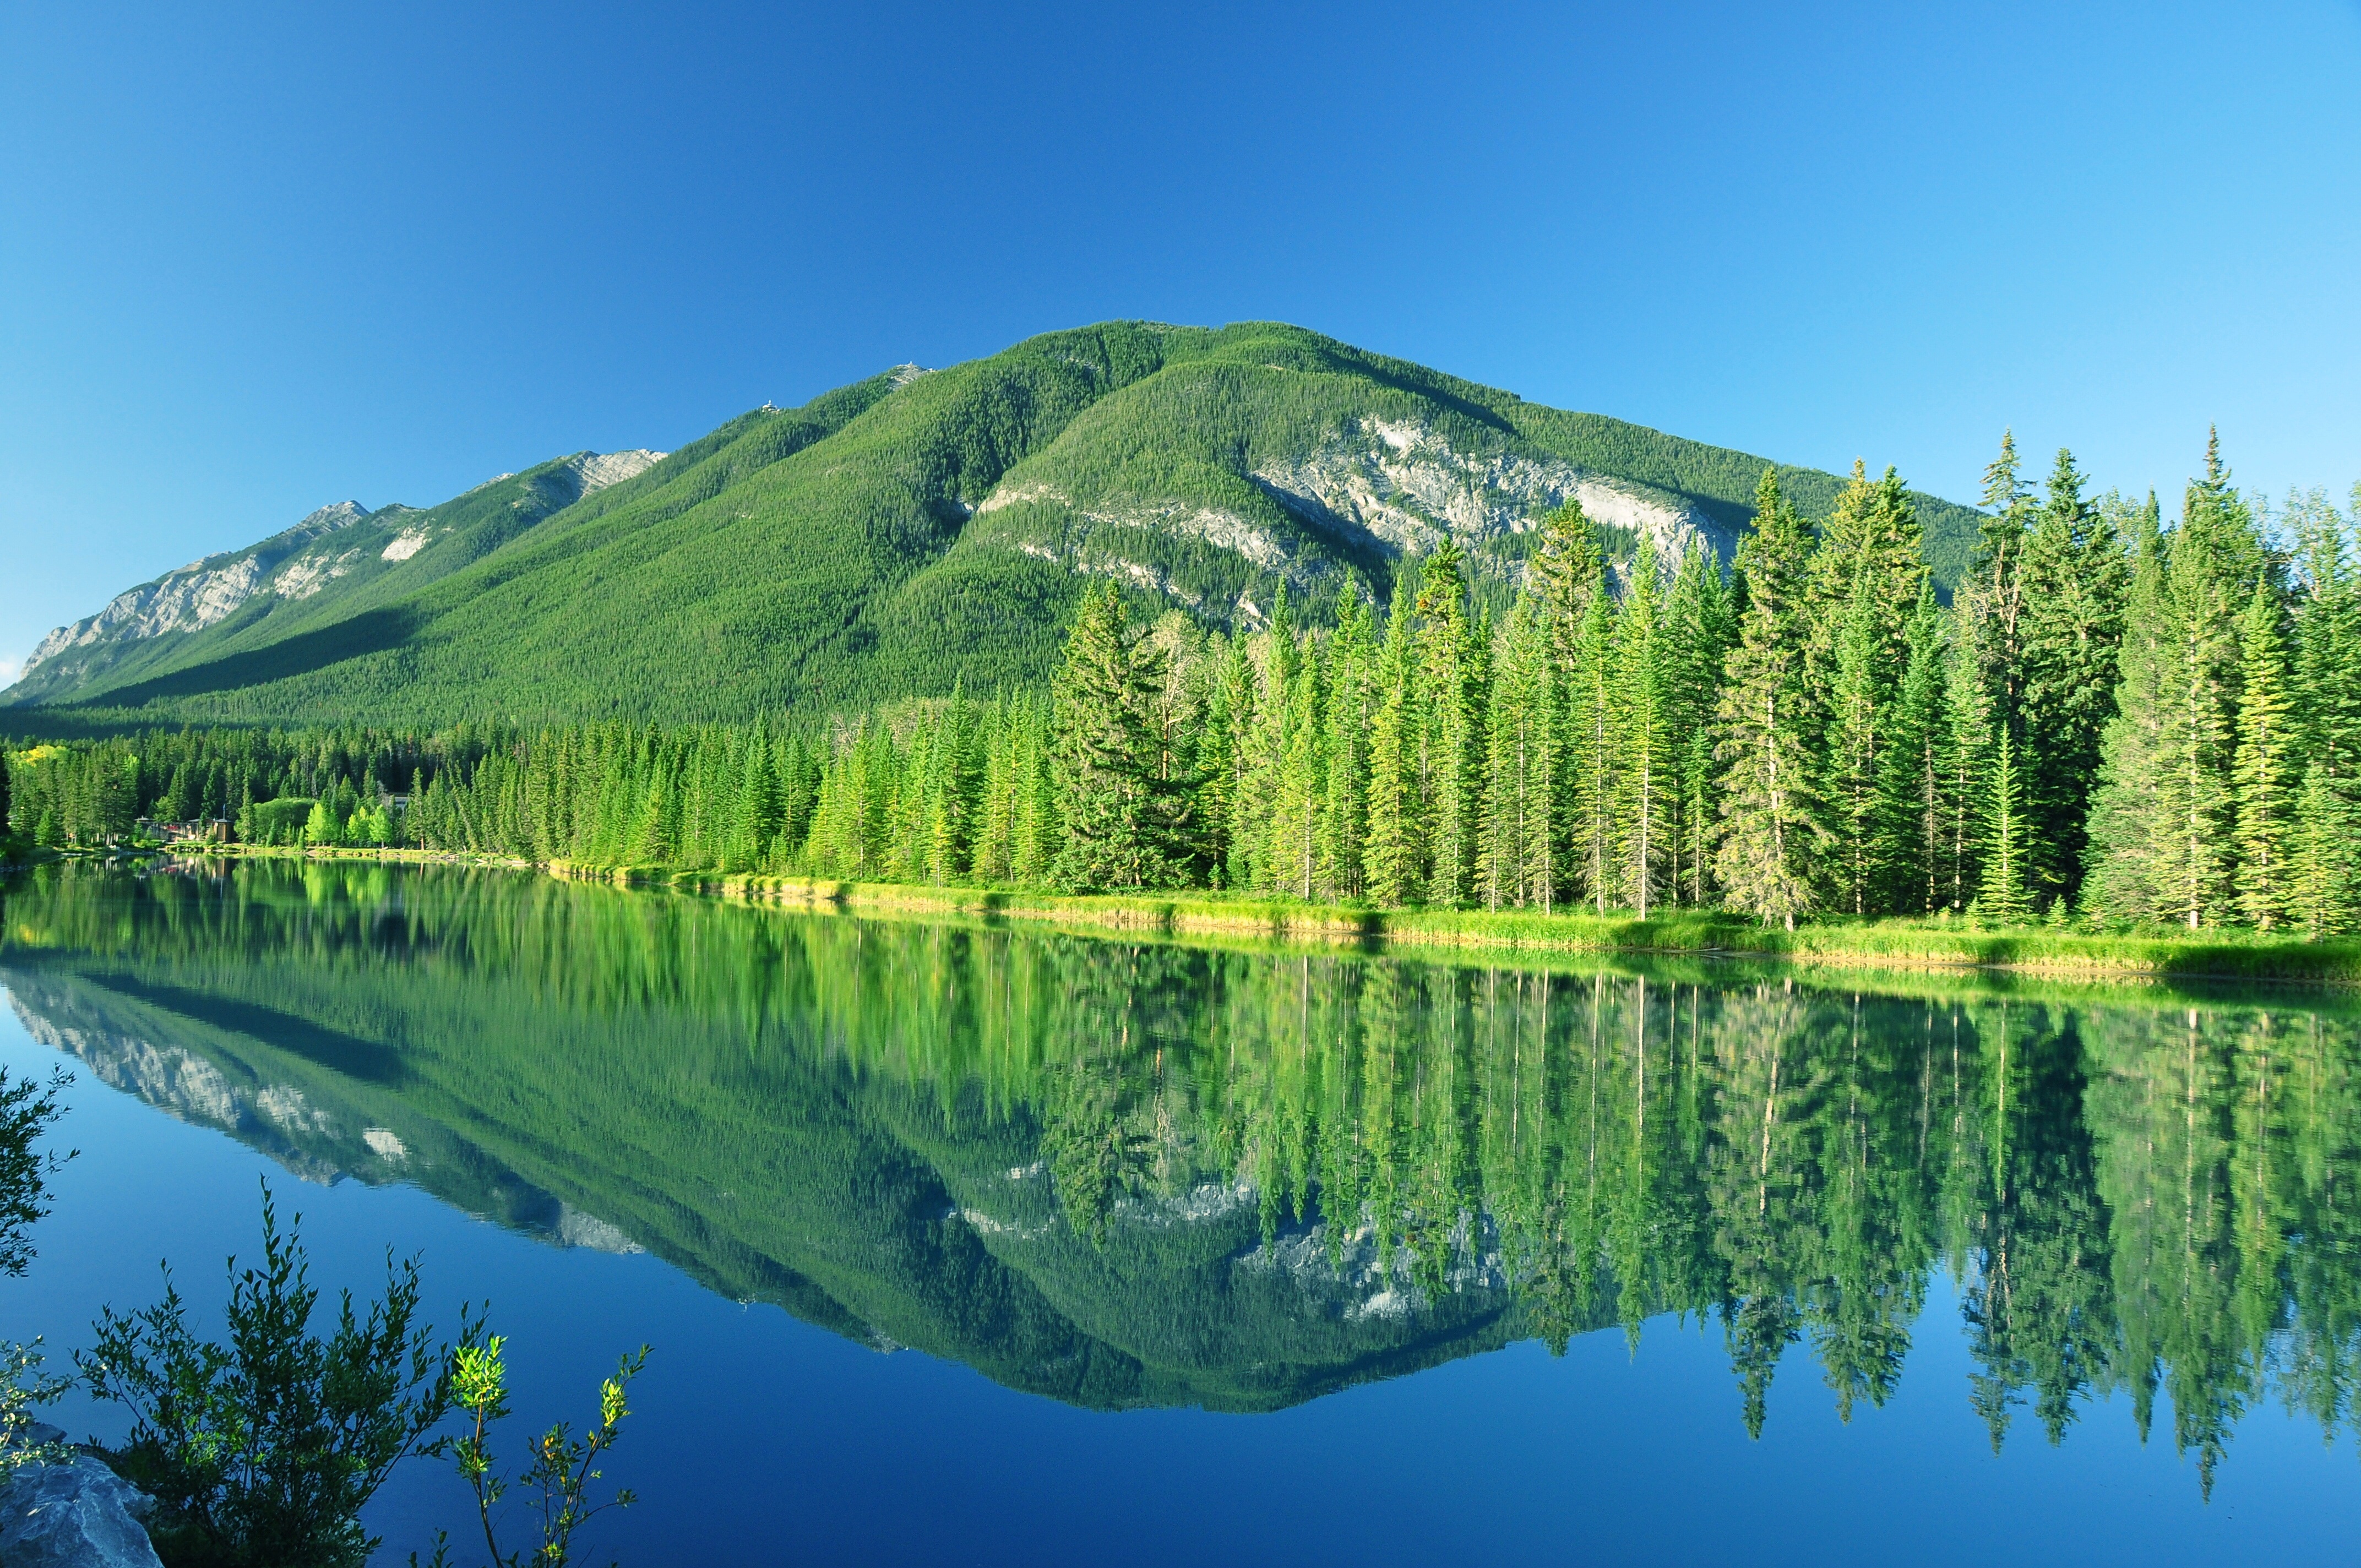 canada, landscape, earth, reflection, banff national park, forest, lake, mountain, tree